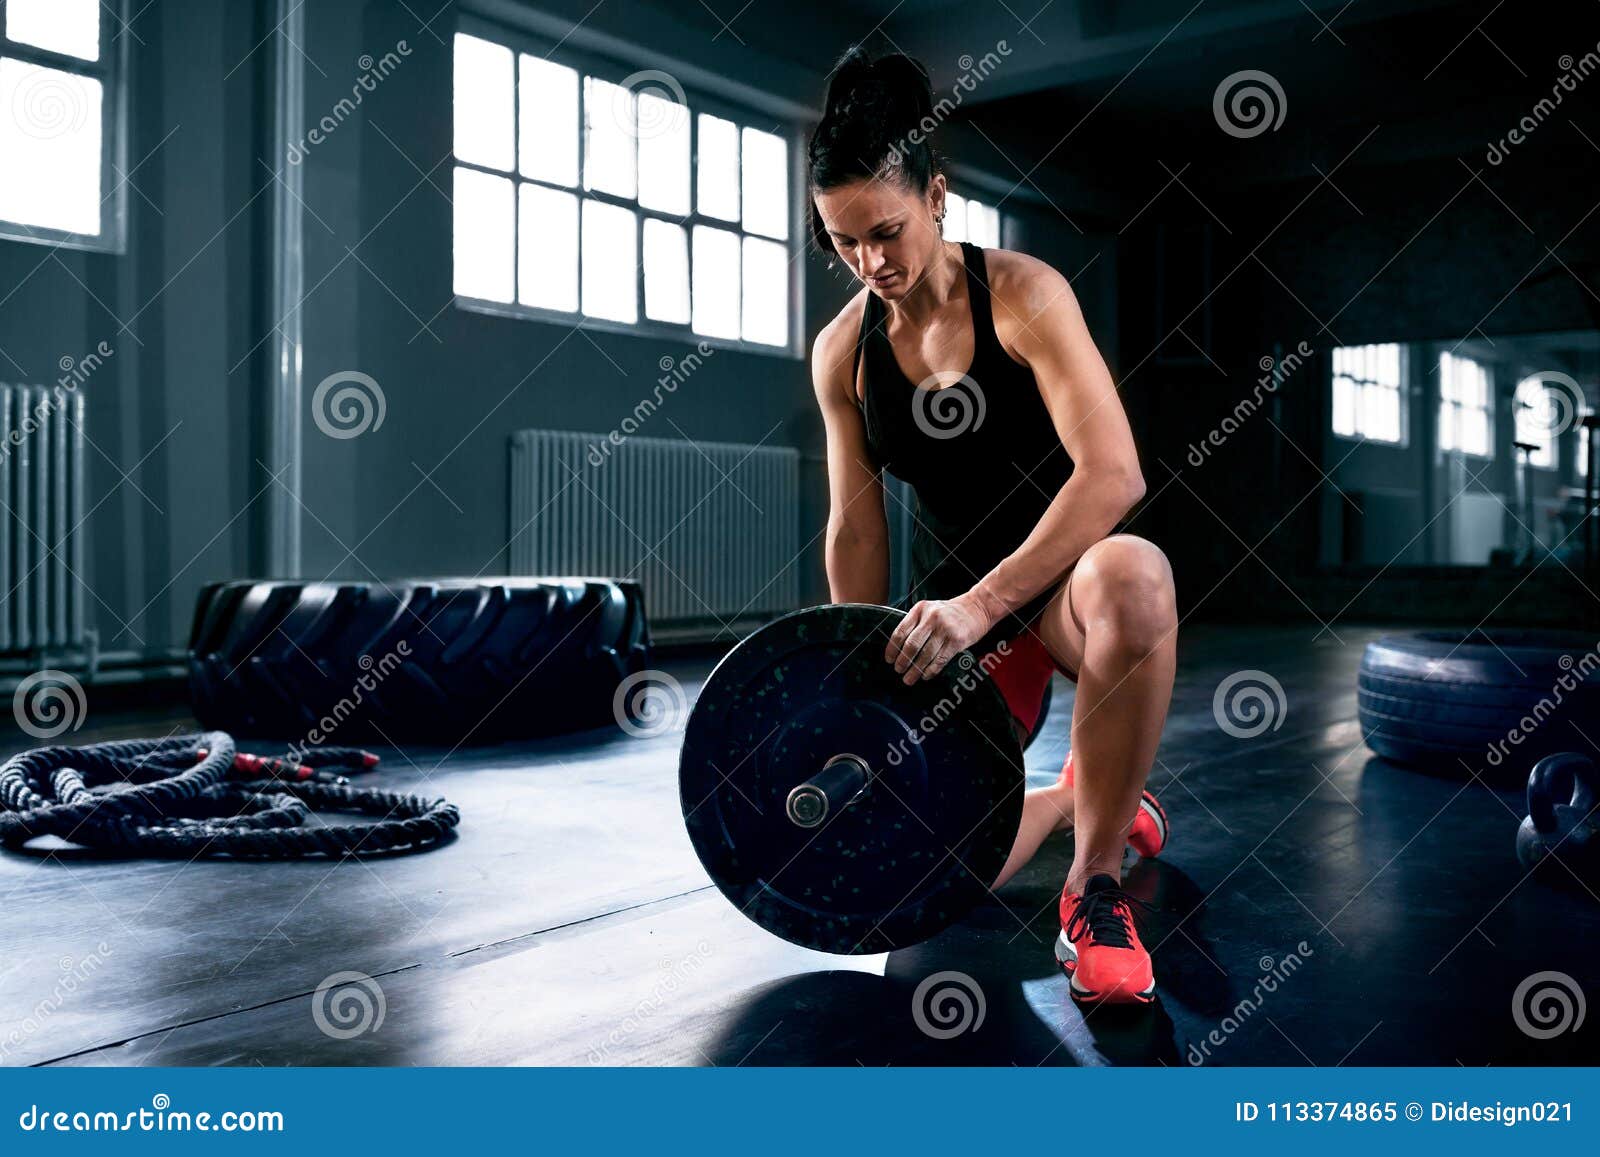 Muscular Young Woman Putting Heavy Weights for Exercise Stock Image ...